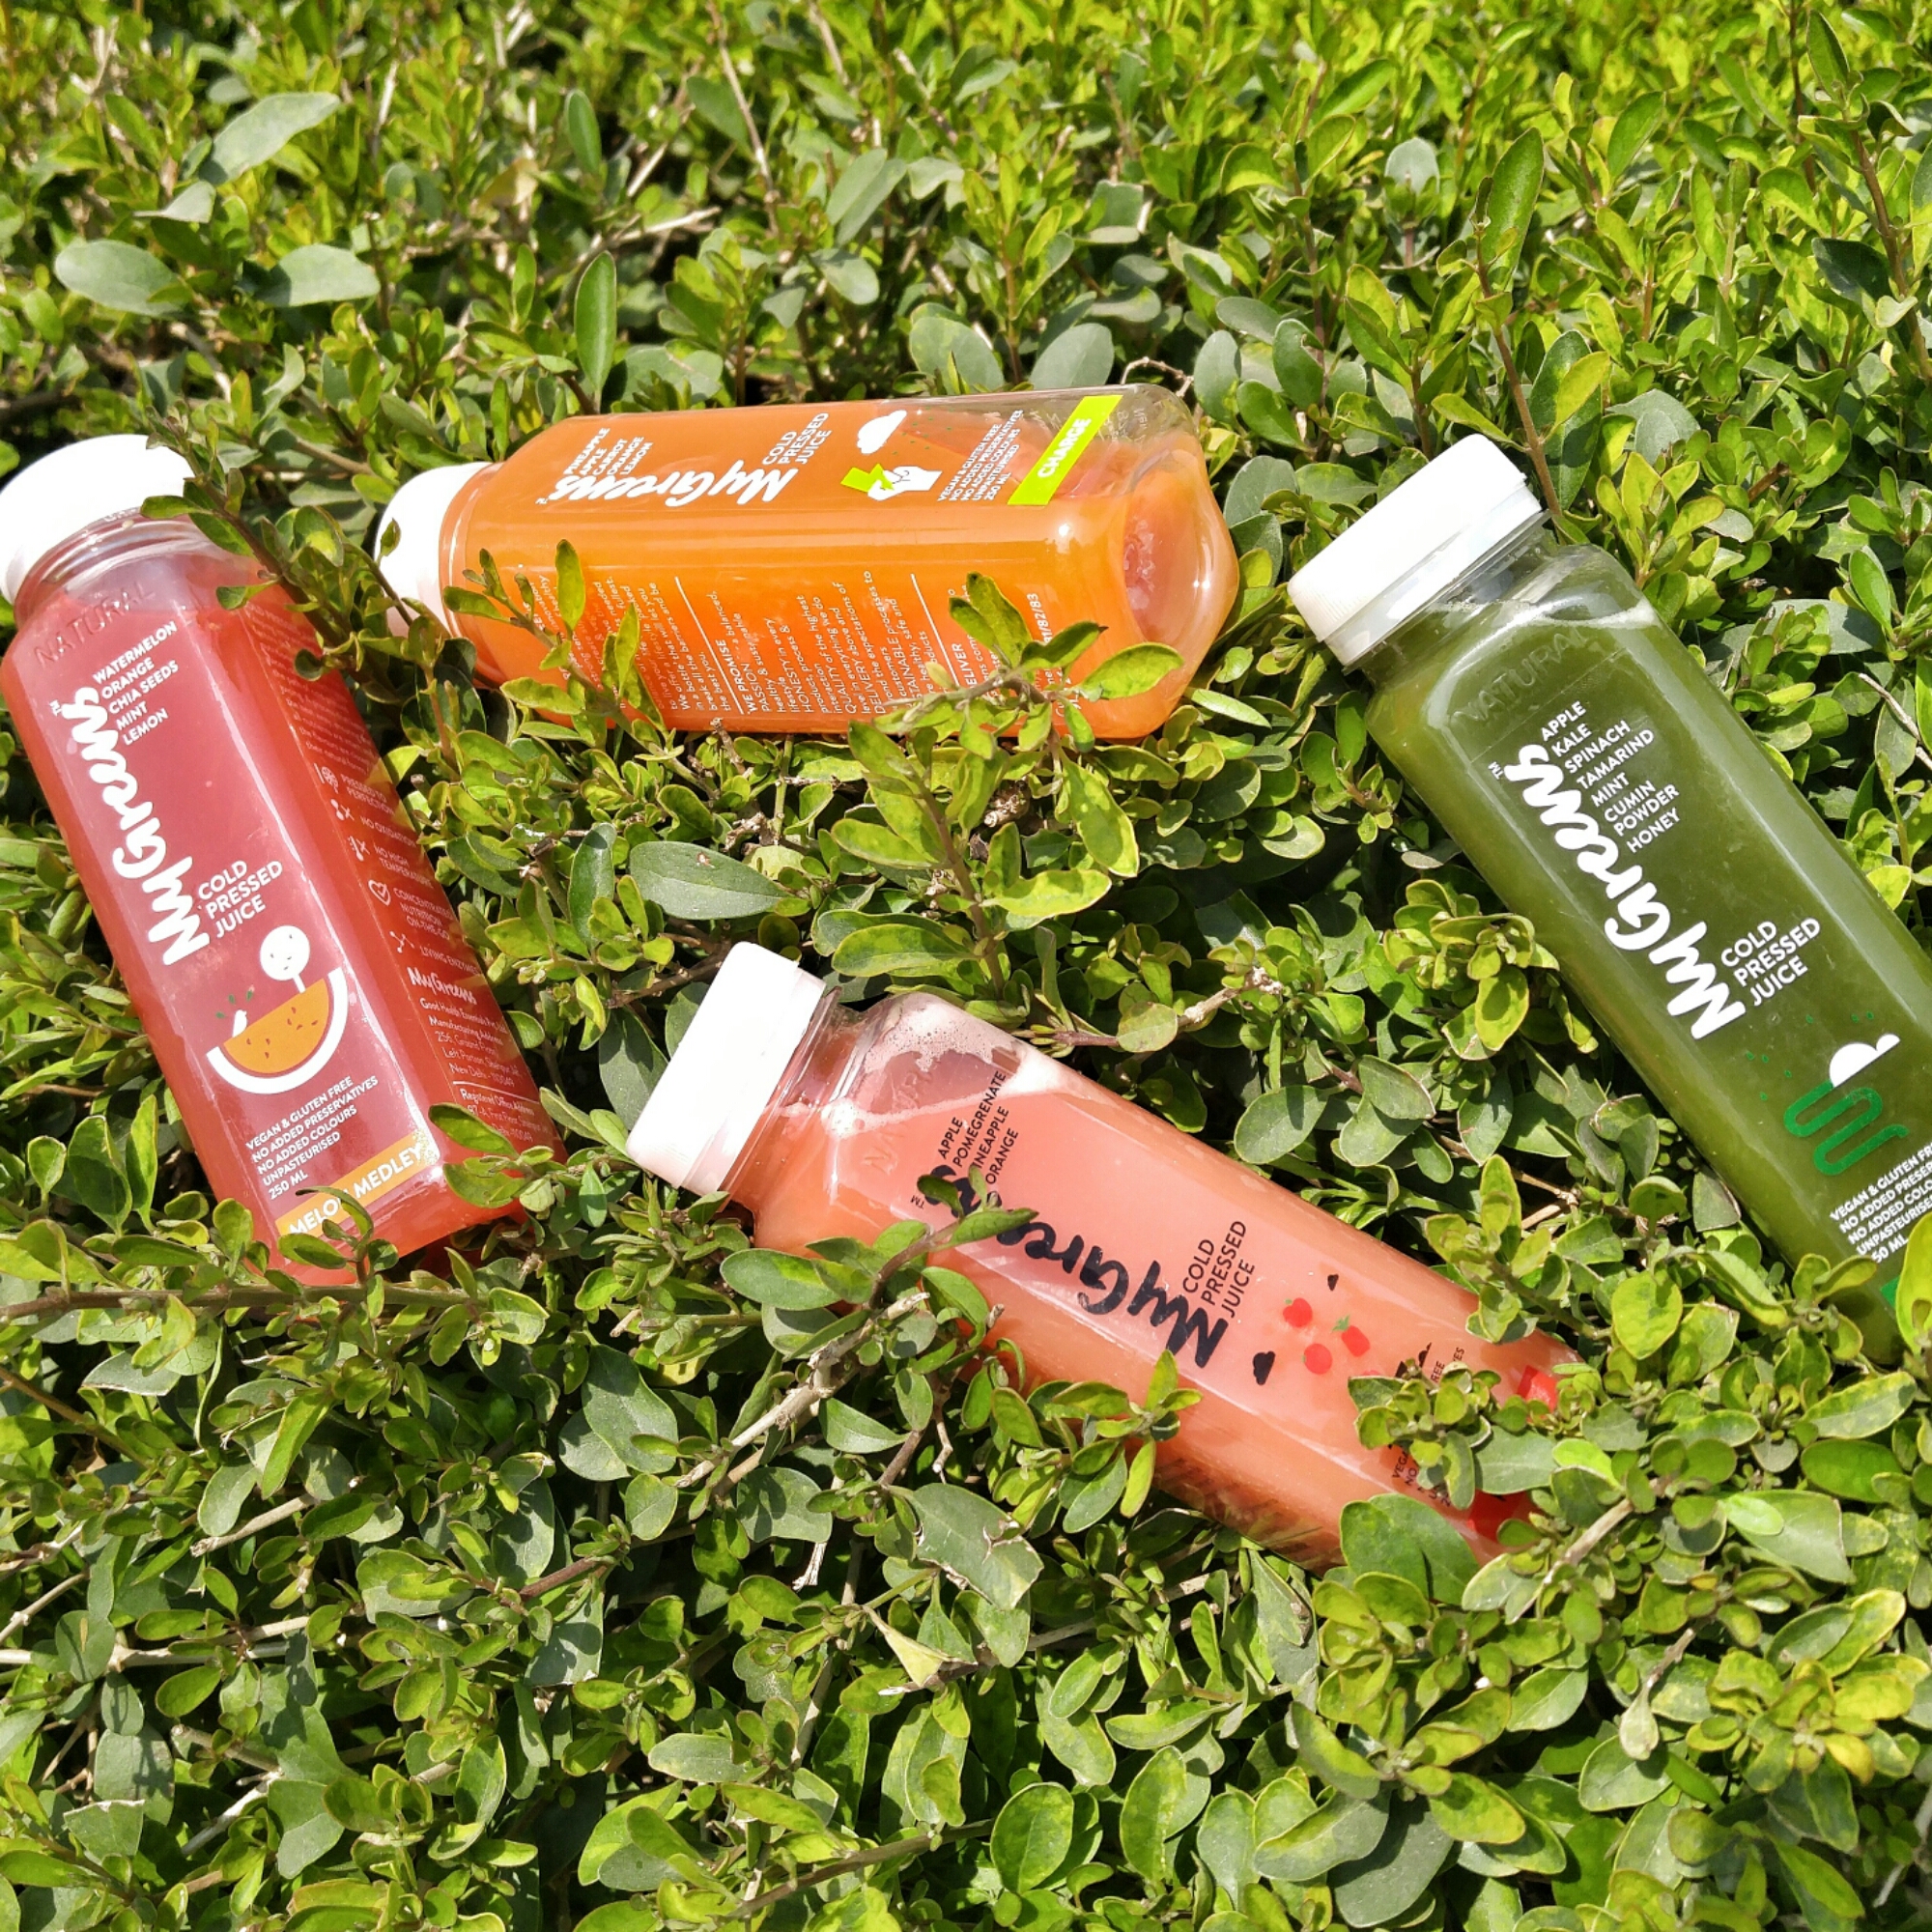 My Greens – Cold Press Juices Review